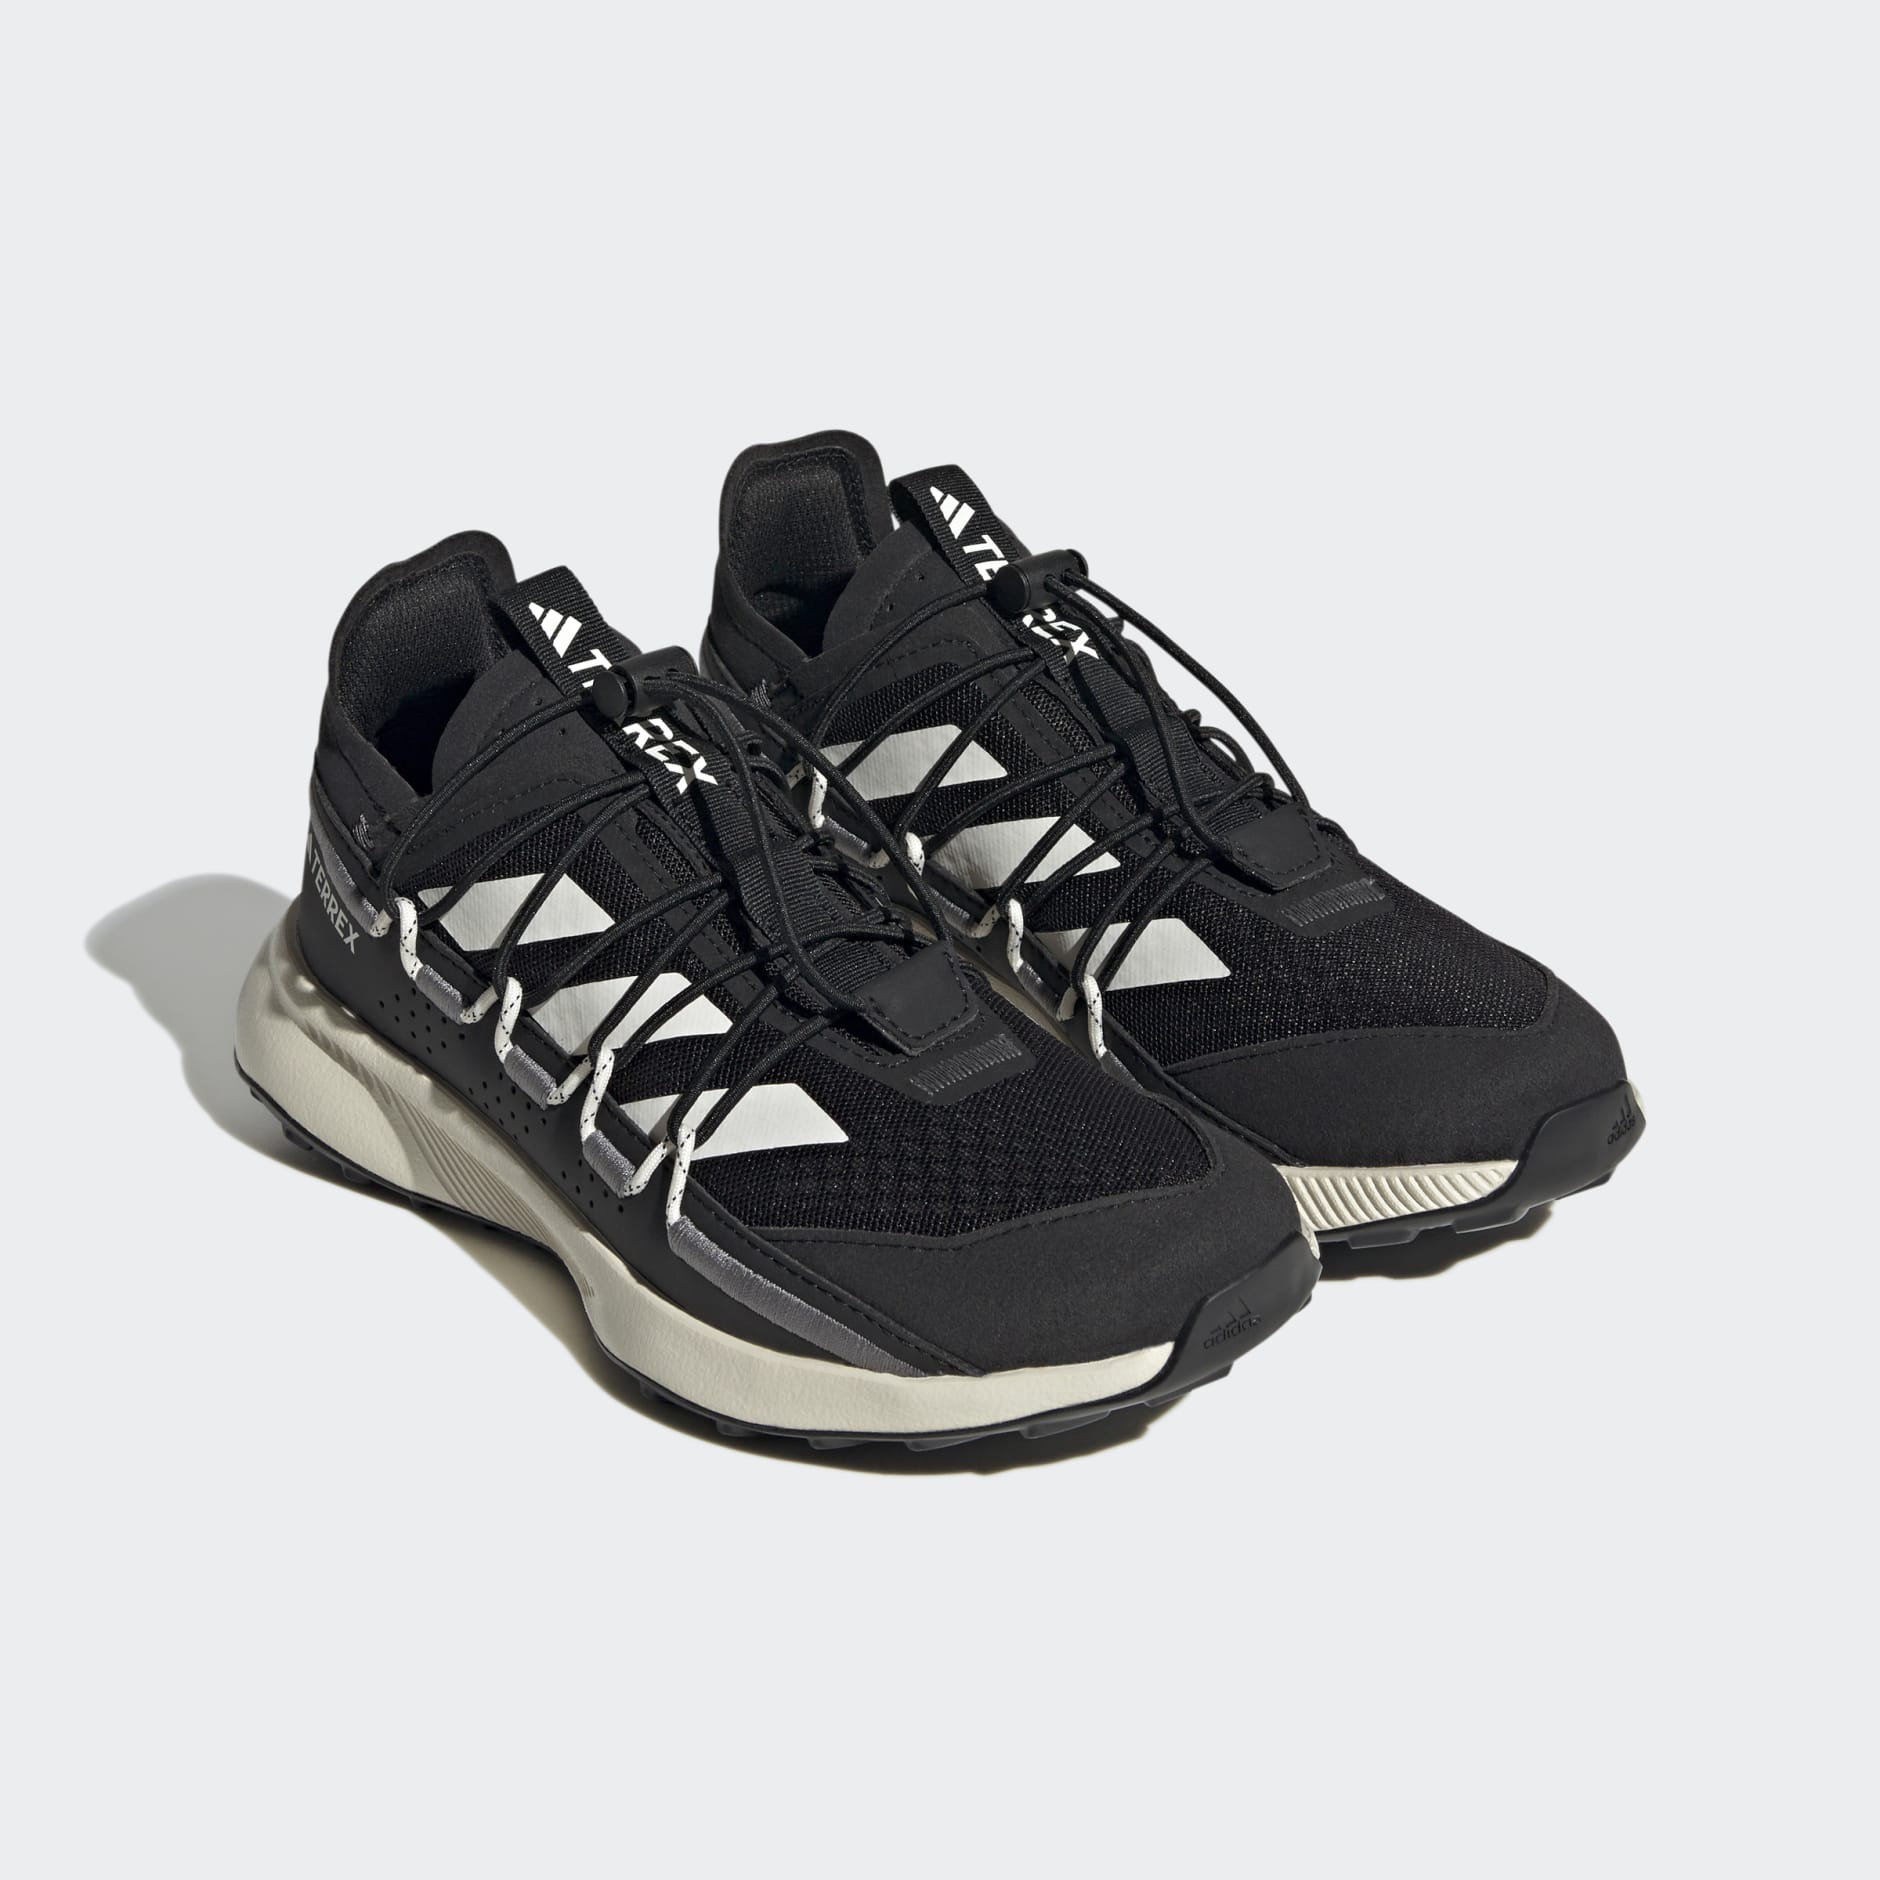 Shoes - Terrex Voyager 21 Travel Shoes - Black | adidas South Africa